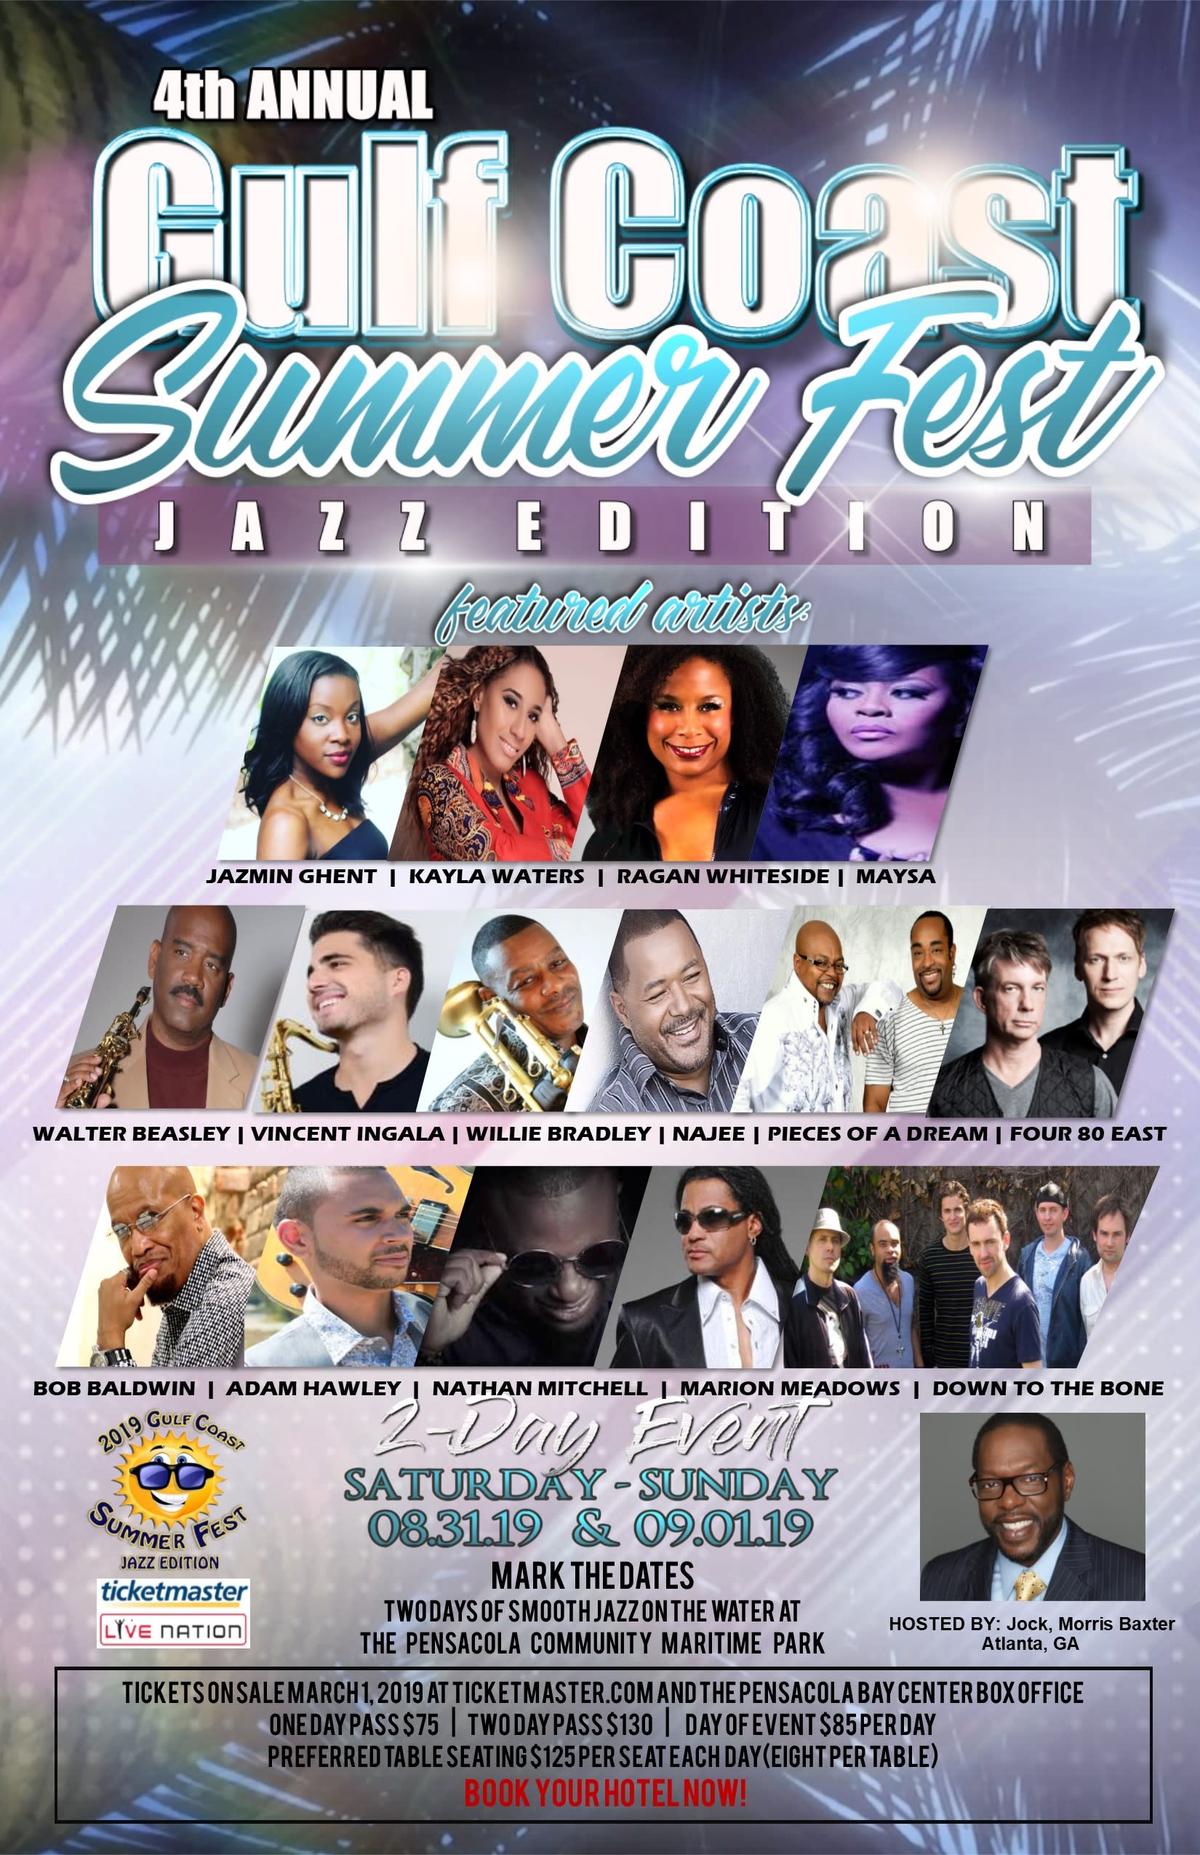 August 31September 1 Gulf Coast Summer Fest Jazz Edition Hosted By